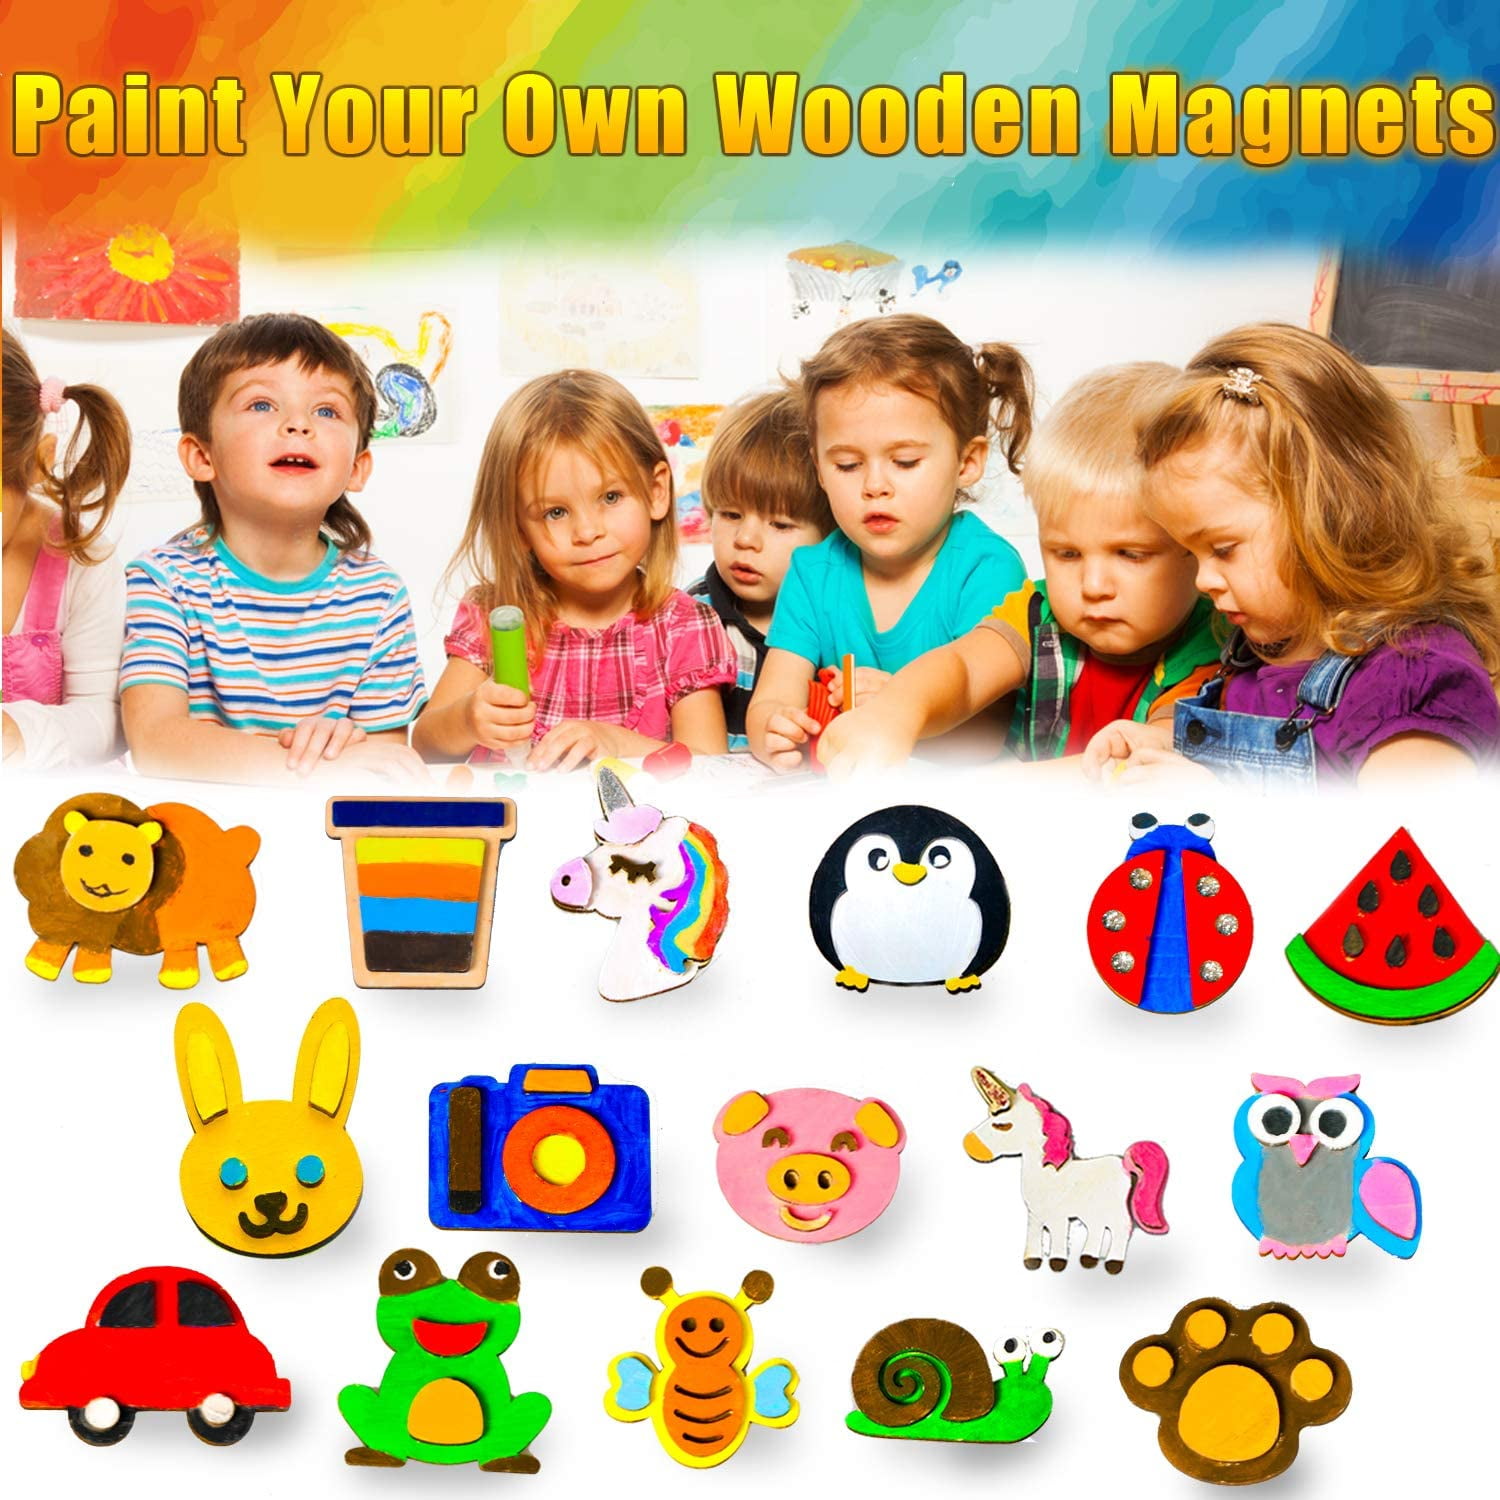 DIY Wooden Magnets, 36 Wooden Art Craft for Kids, Art and Craft